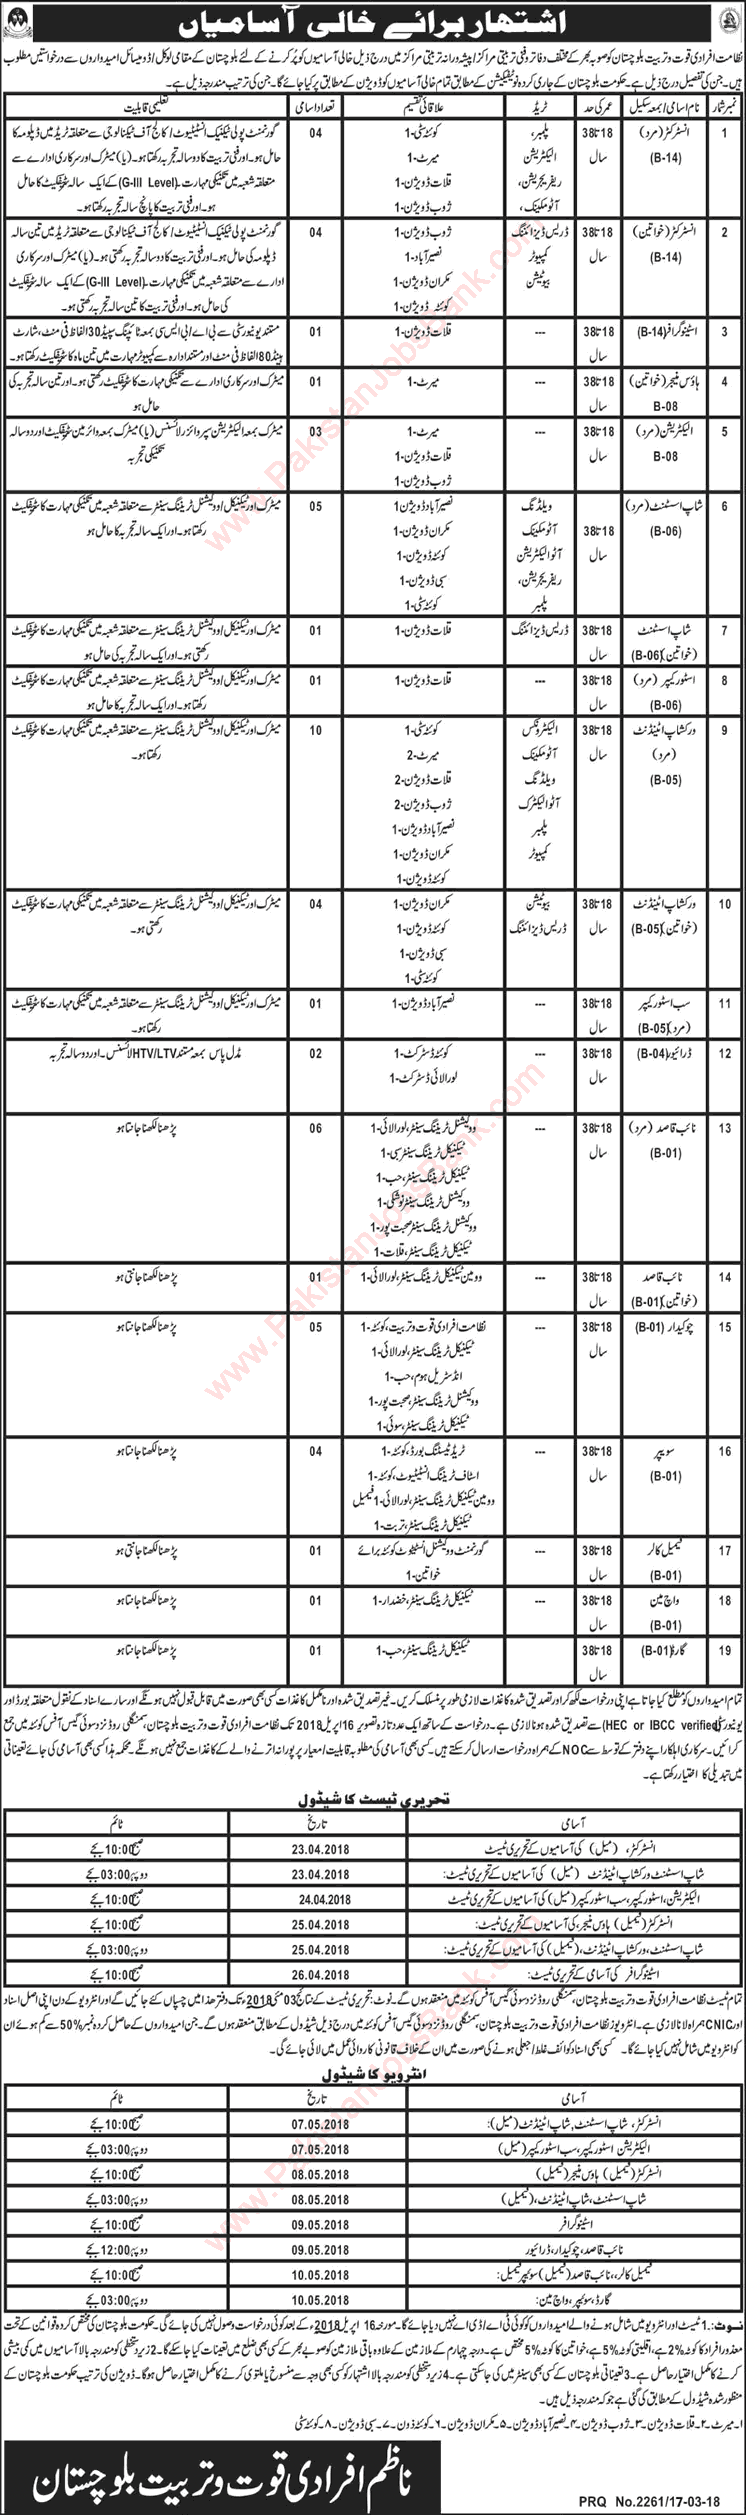 Directorate of Manpower and Training Balochistan Jobs 2018 March Instructors, Workshop Attendants & Others Latest